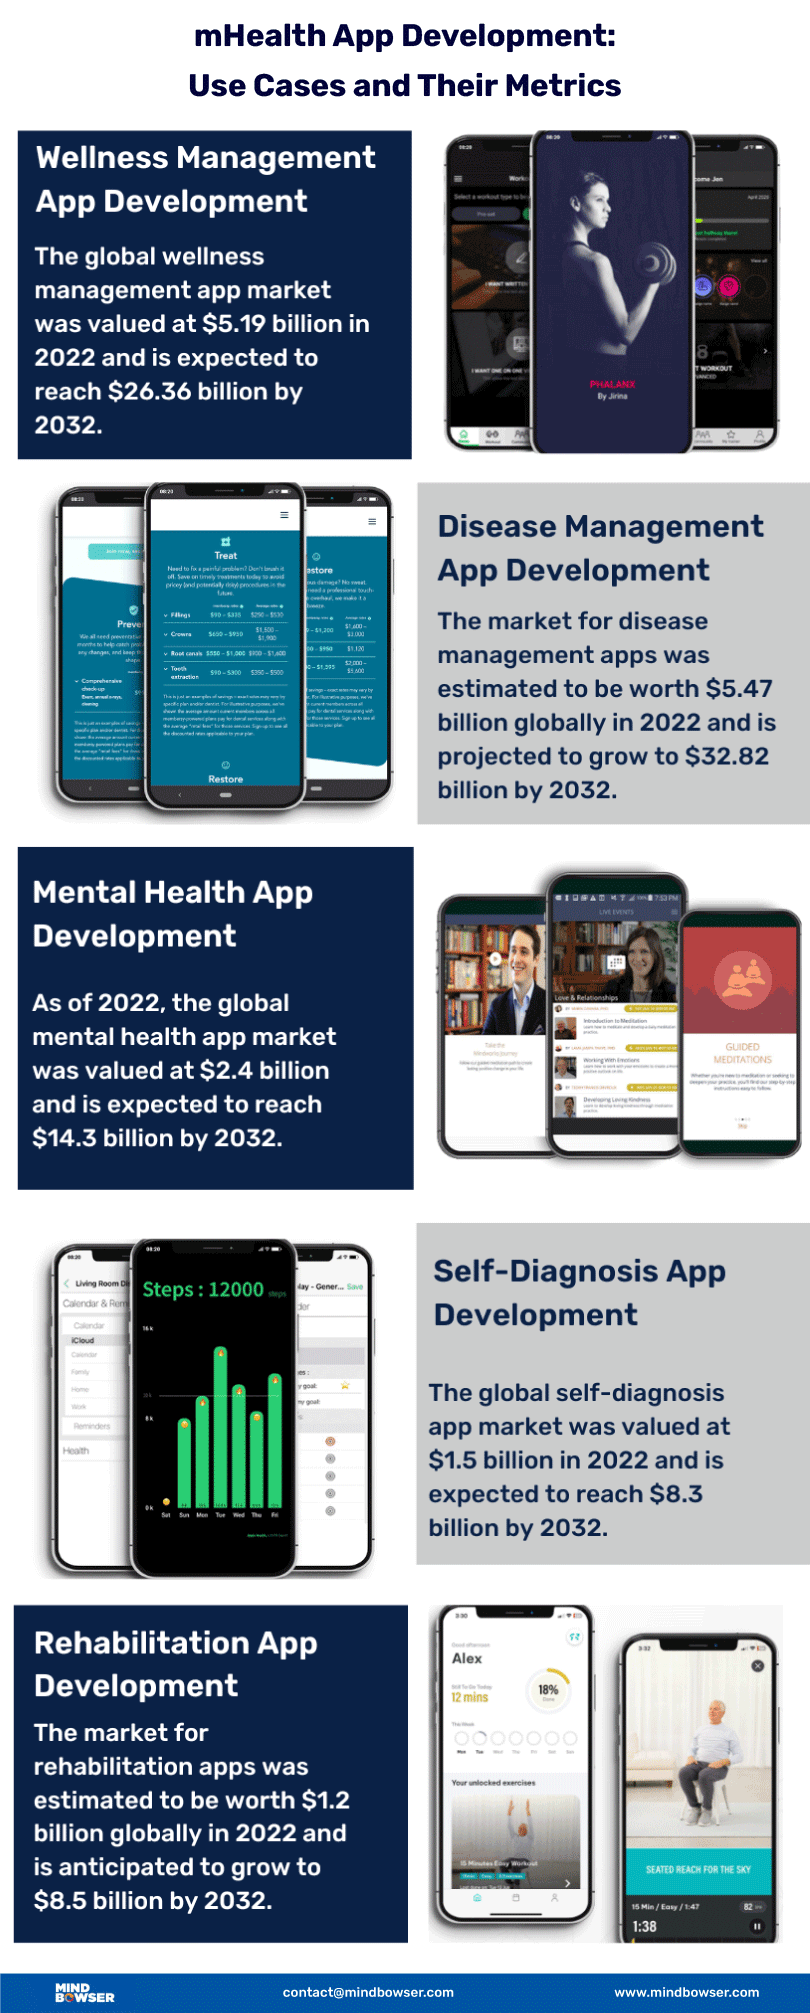 Use-Cases-of-mHealth-App-Development-in-Healthcare